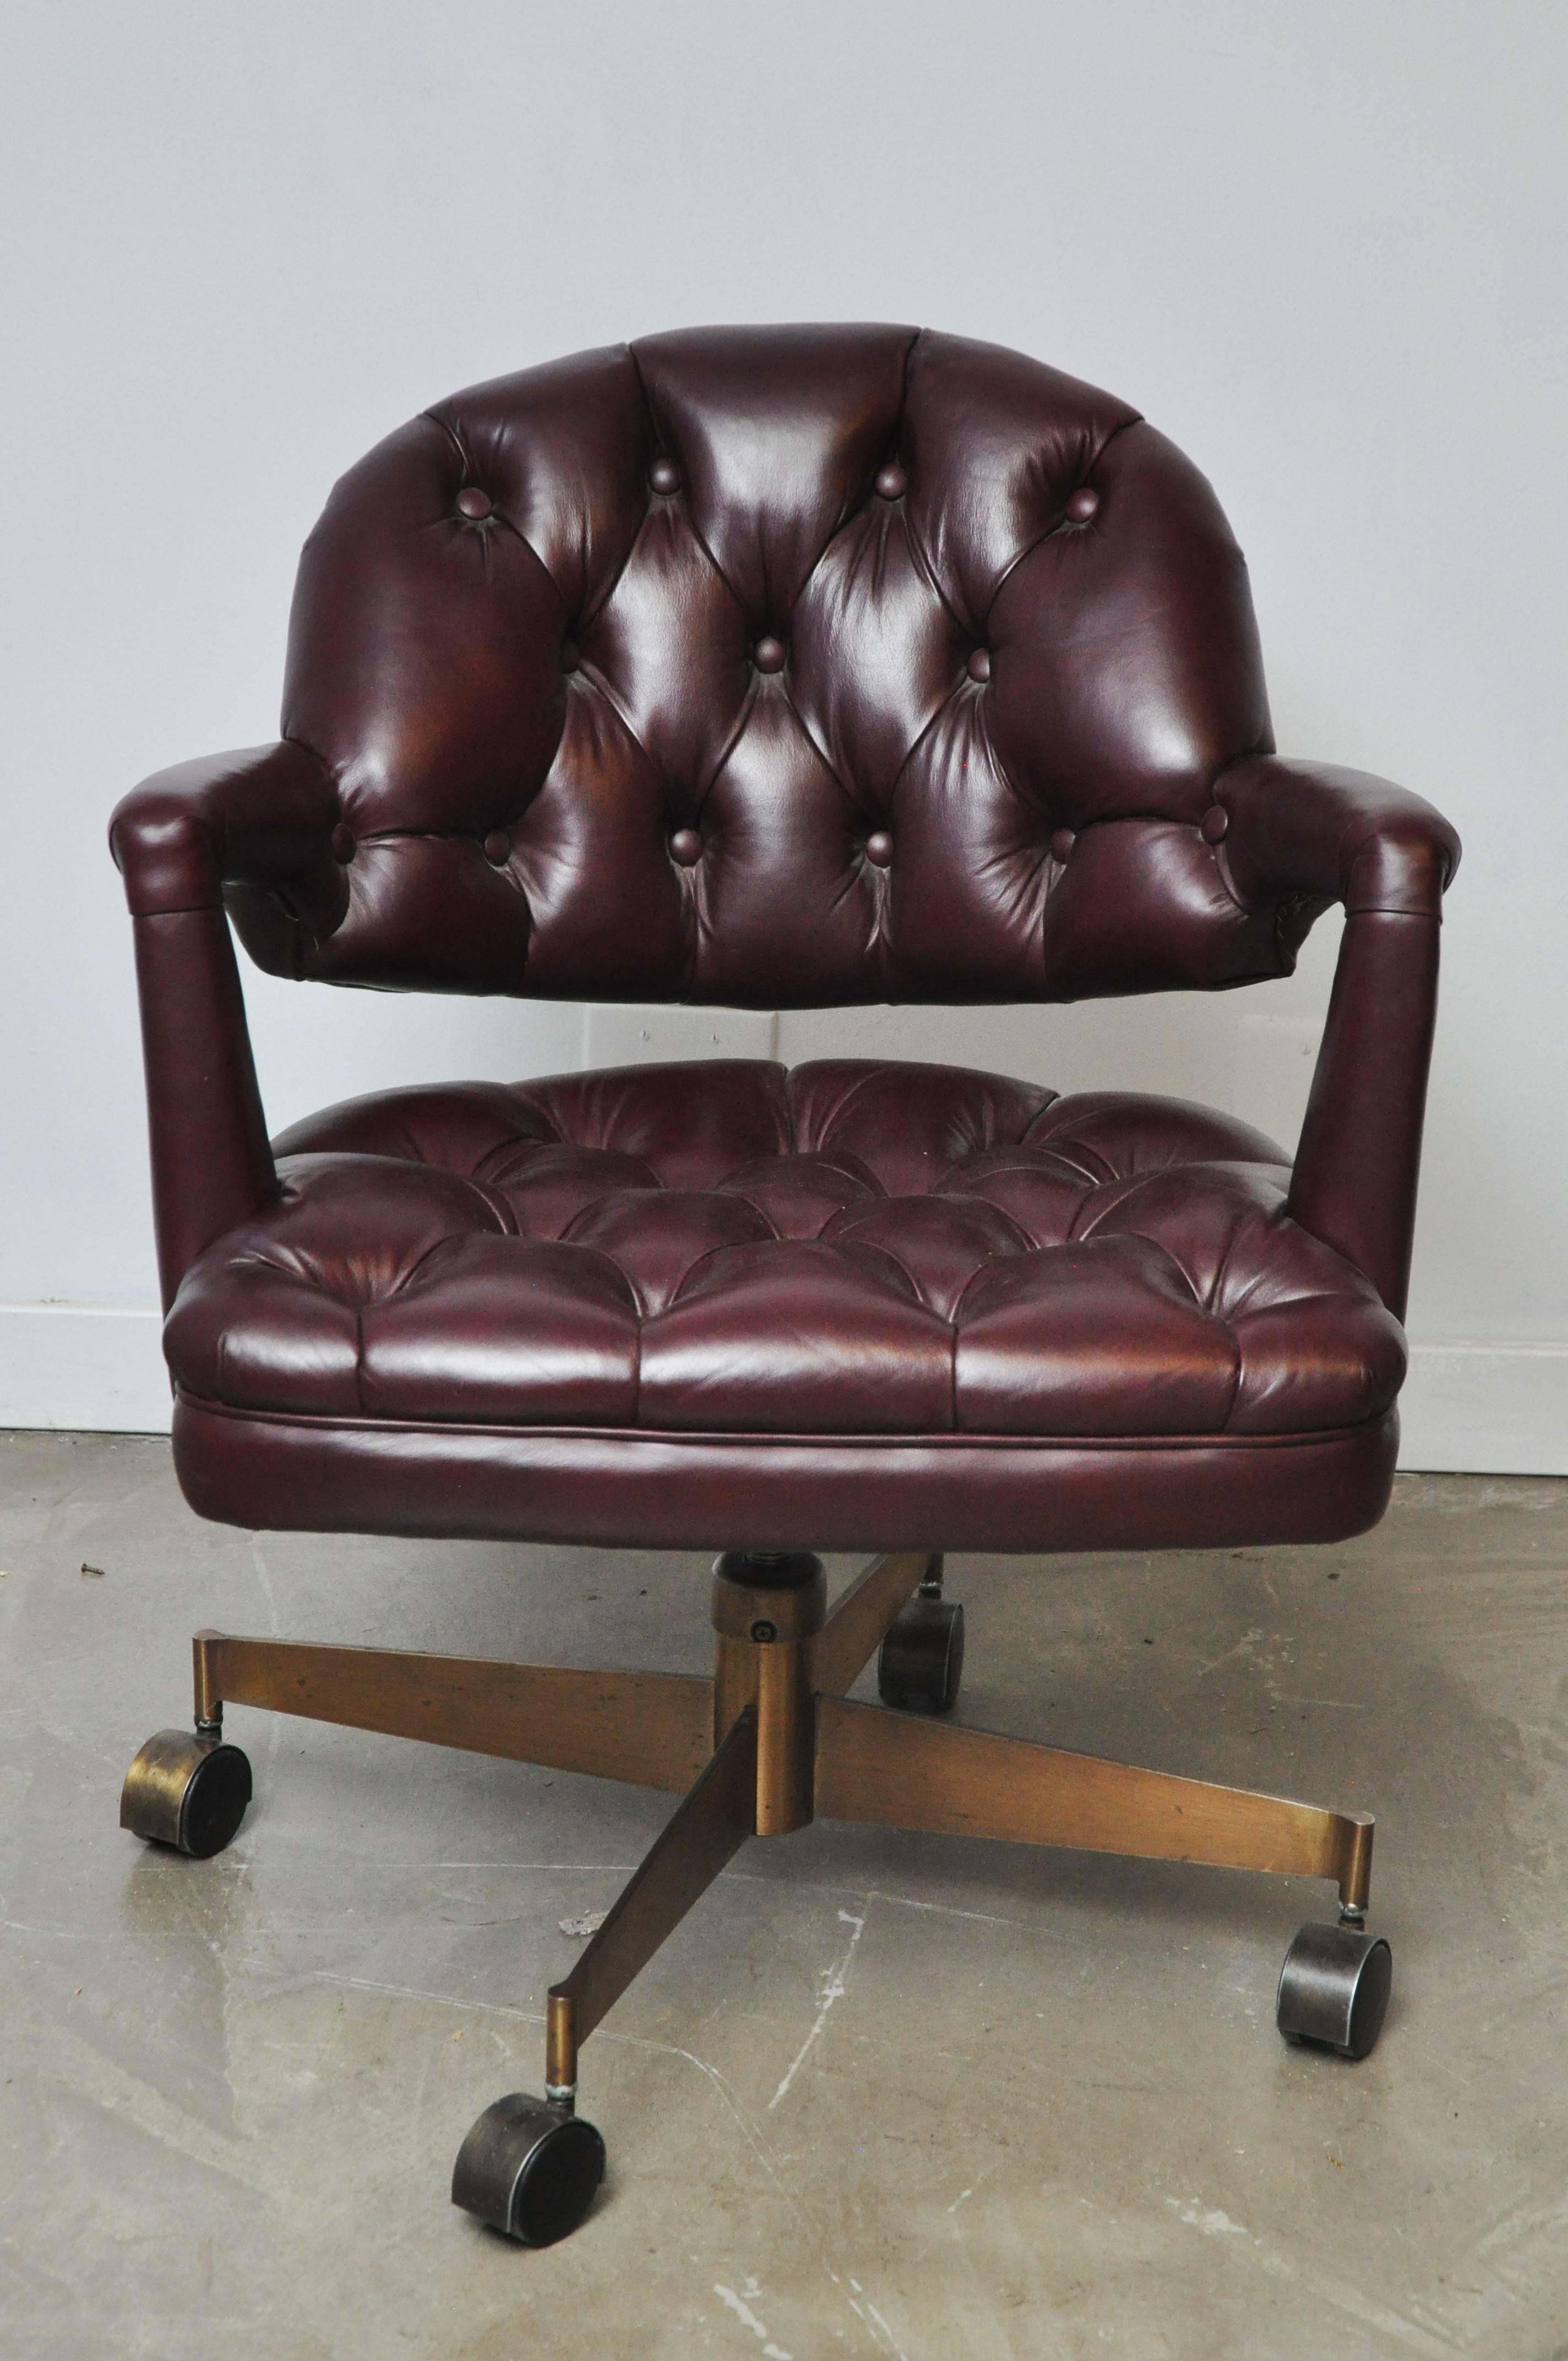 Leather tufted desk chair by Edward Wormley for Dunbar. Beautiful burgundy leather with bronze base, circa 1954. Adjustable seat height.